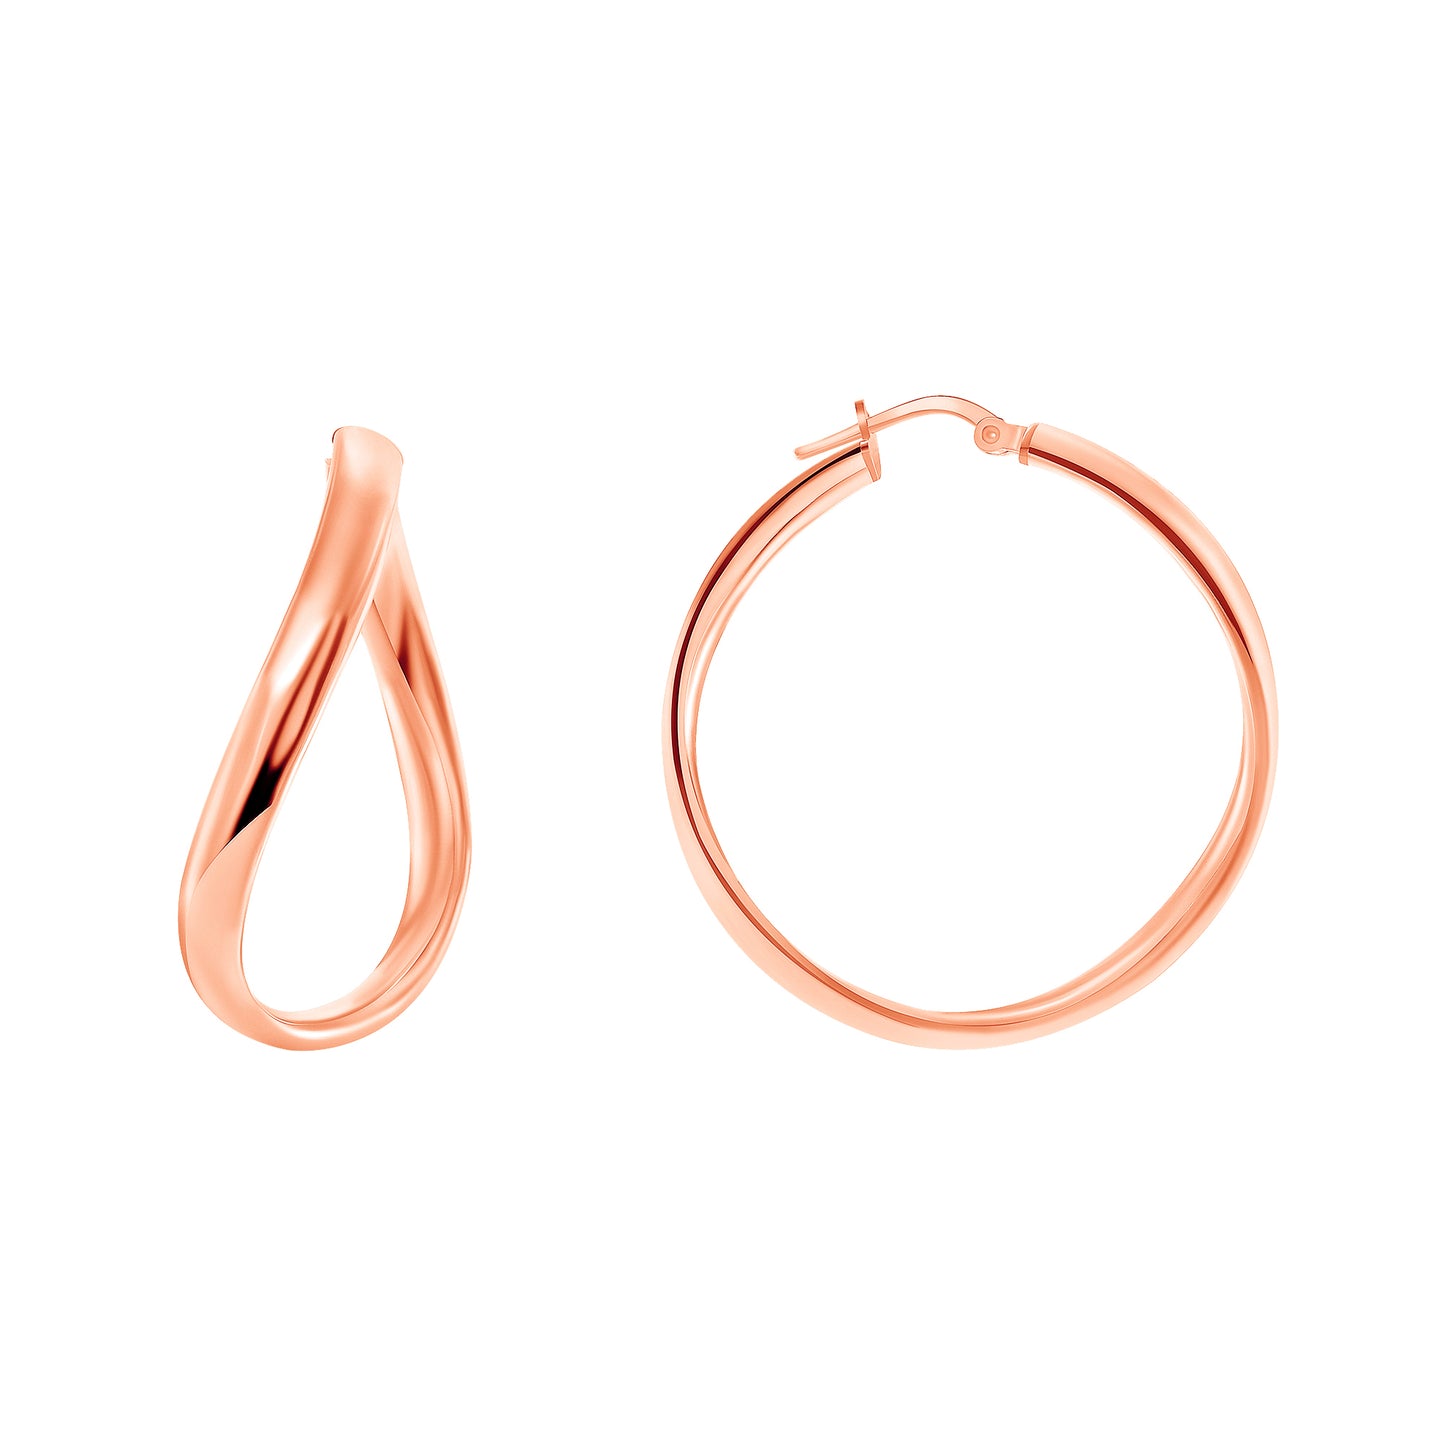 Silver 925 Rose Gold Plated Concave 4MM X 25 MM Plain Hoop Earring. ITHP43-25MRG